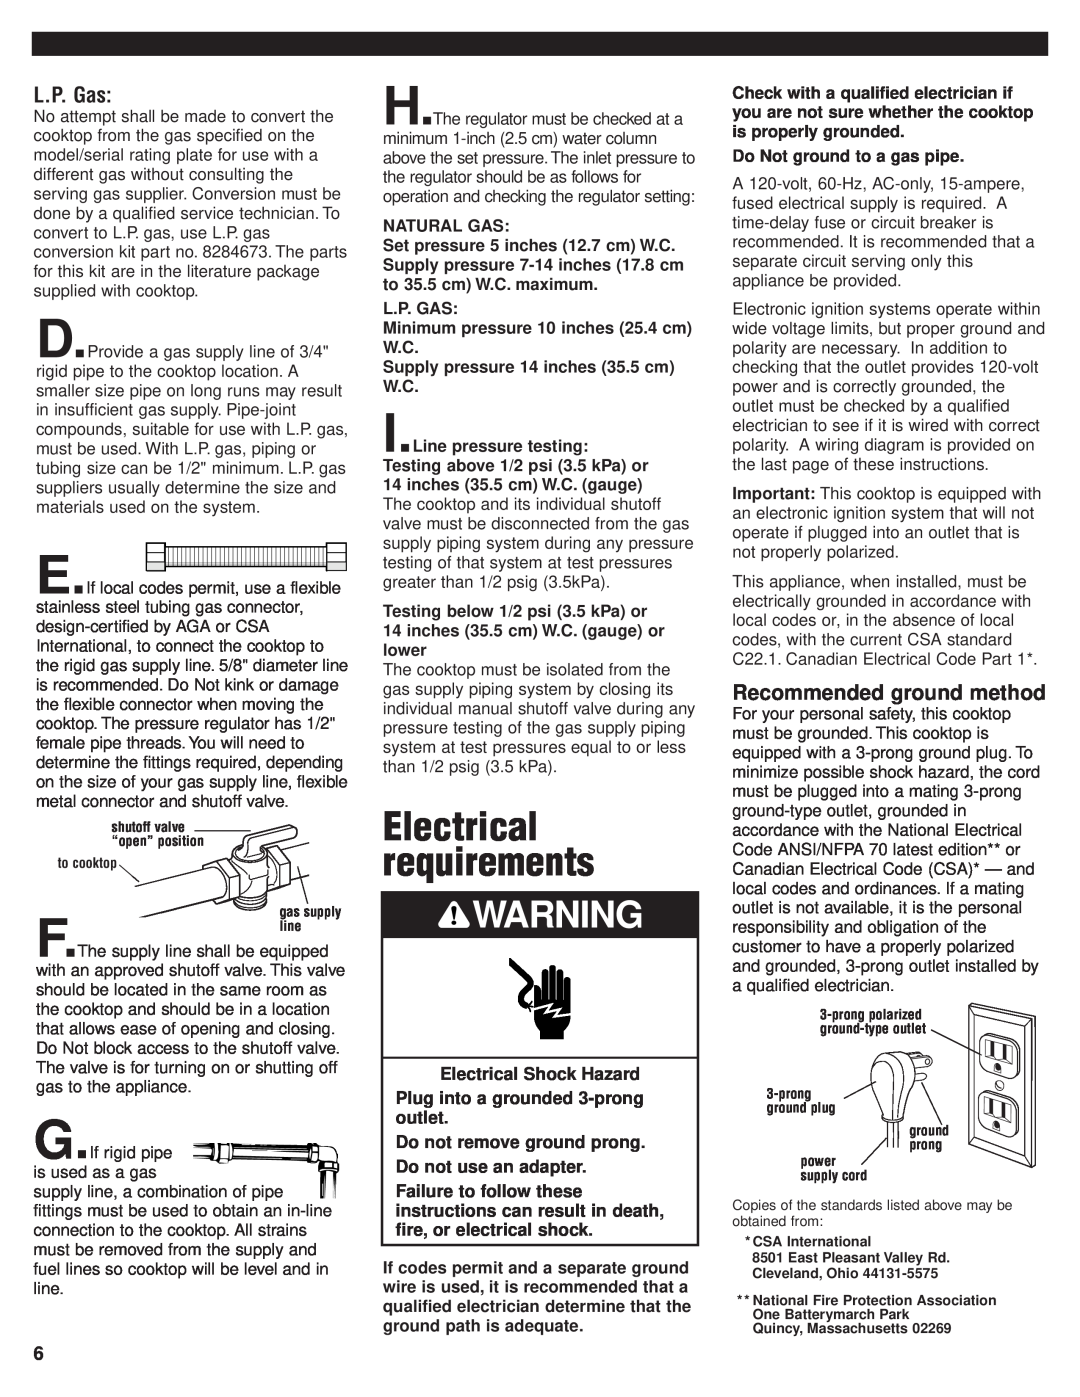 KitchenAid 8284670 installation instructions Electrical requirements, L.P. Gas, Recommended ground method 